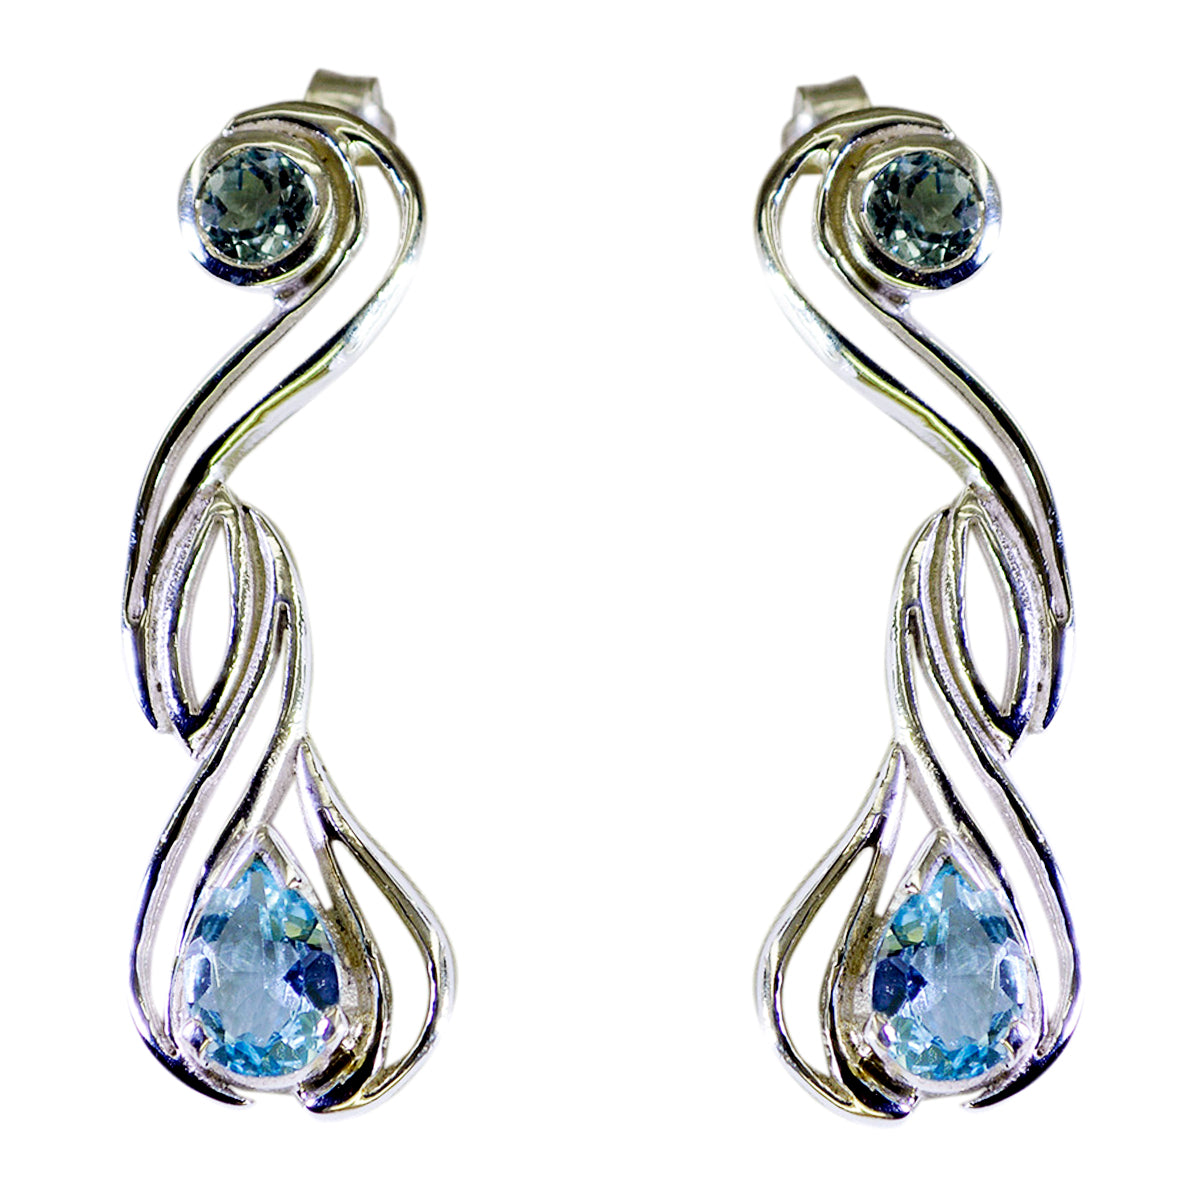 Riyo Real Gemstones multi shape Faceted Blue Topaz Silver Earring gift for independence